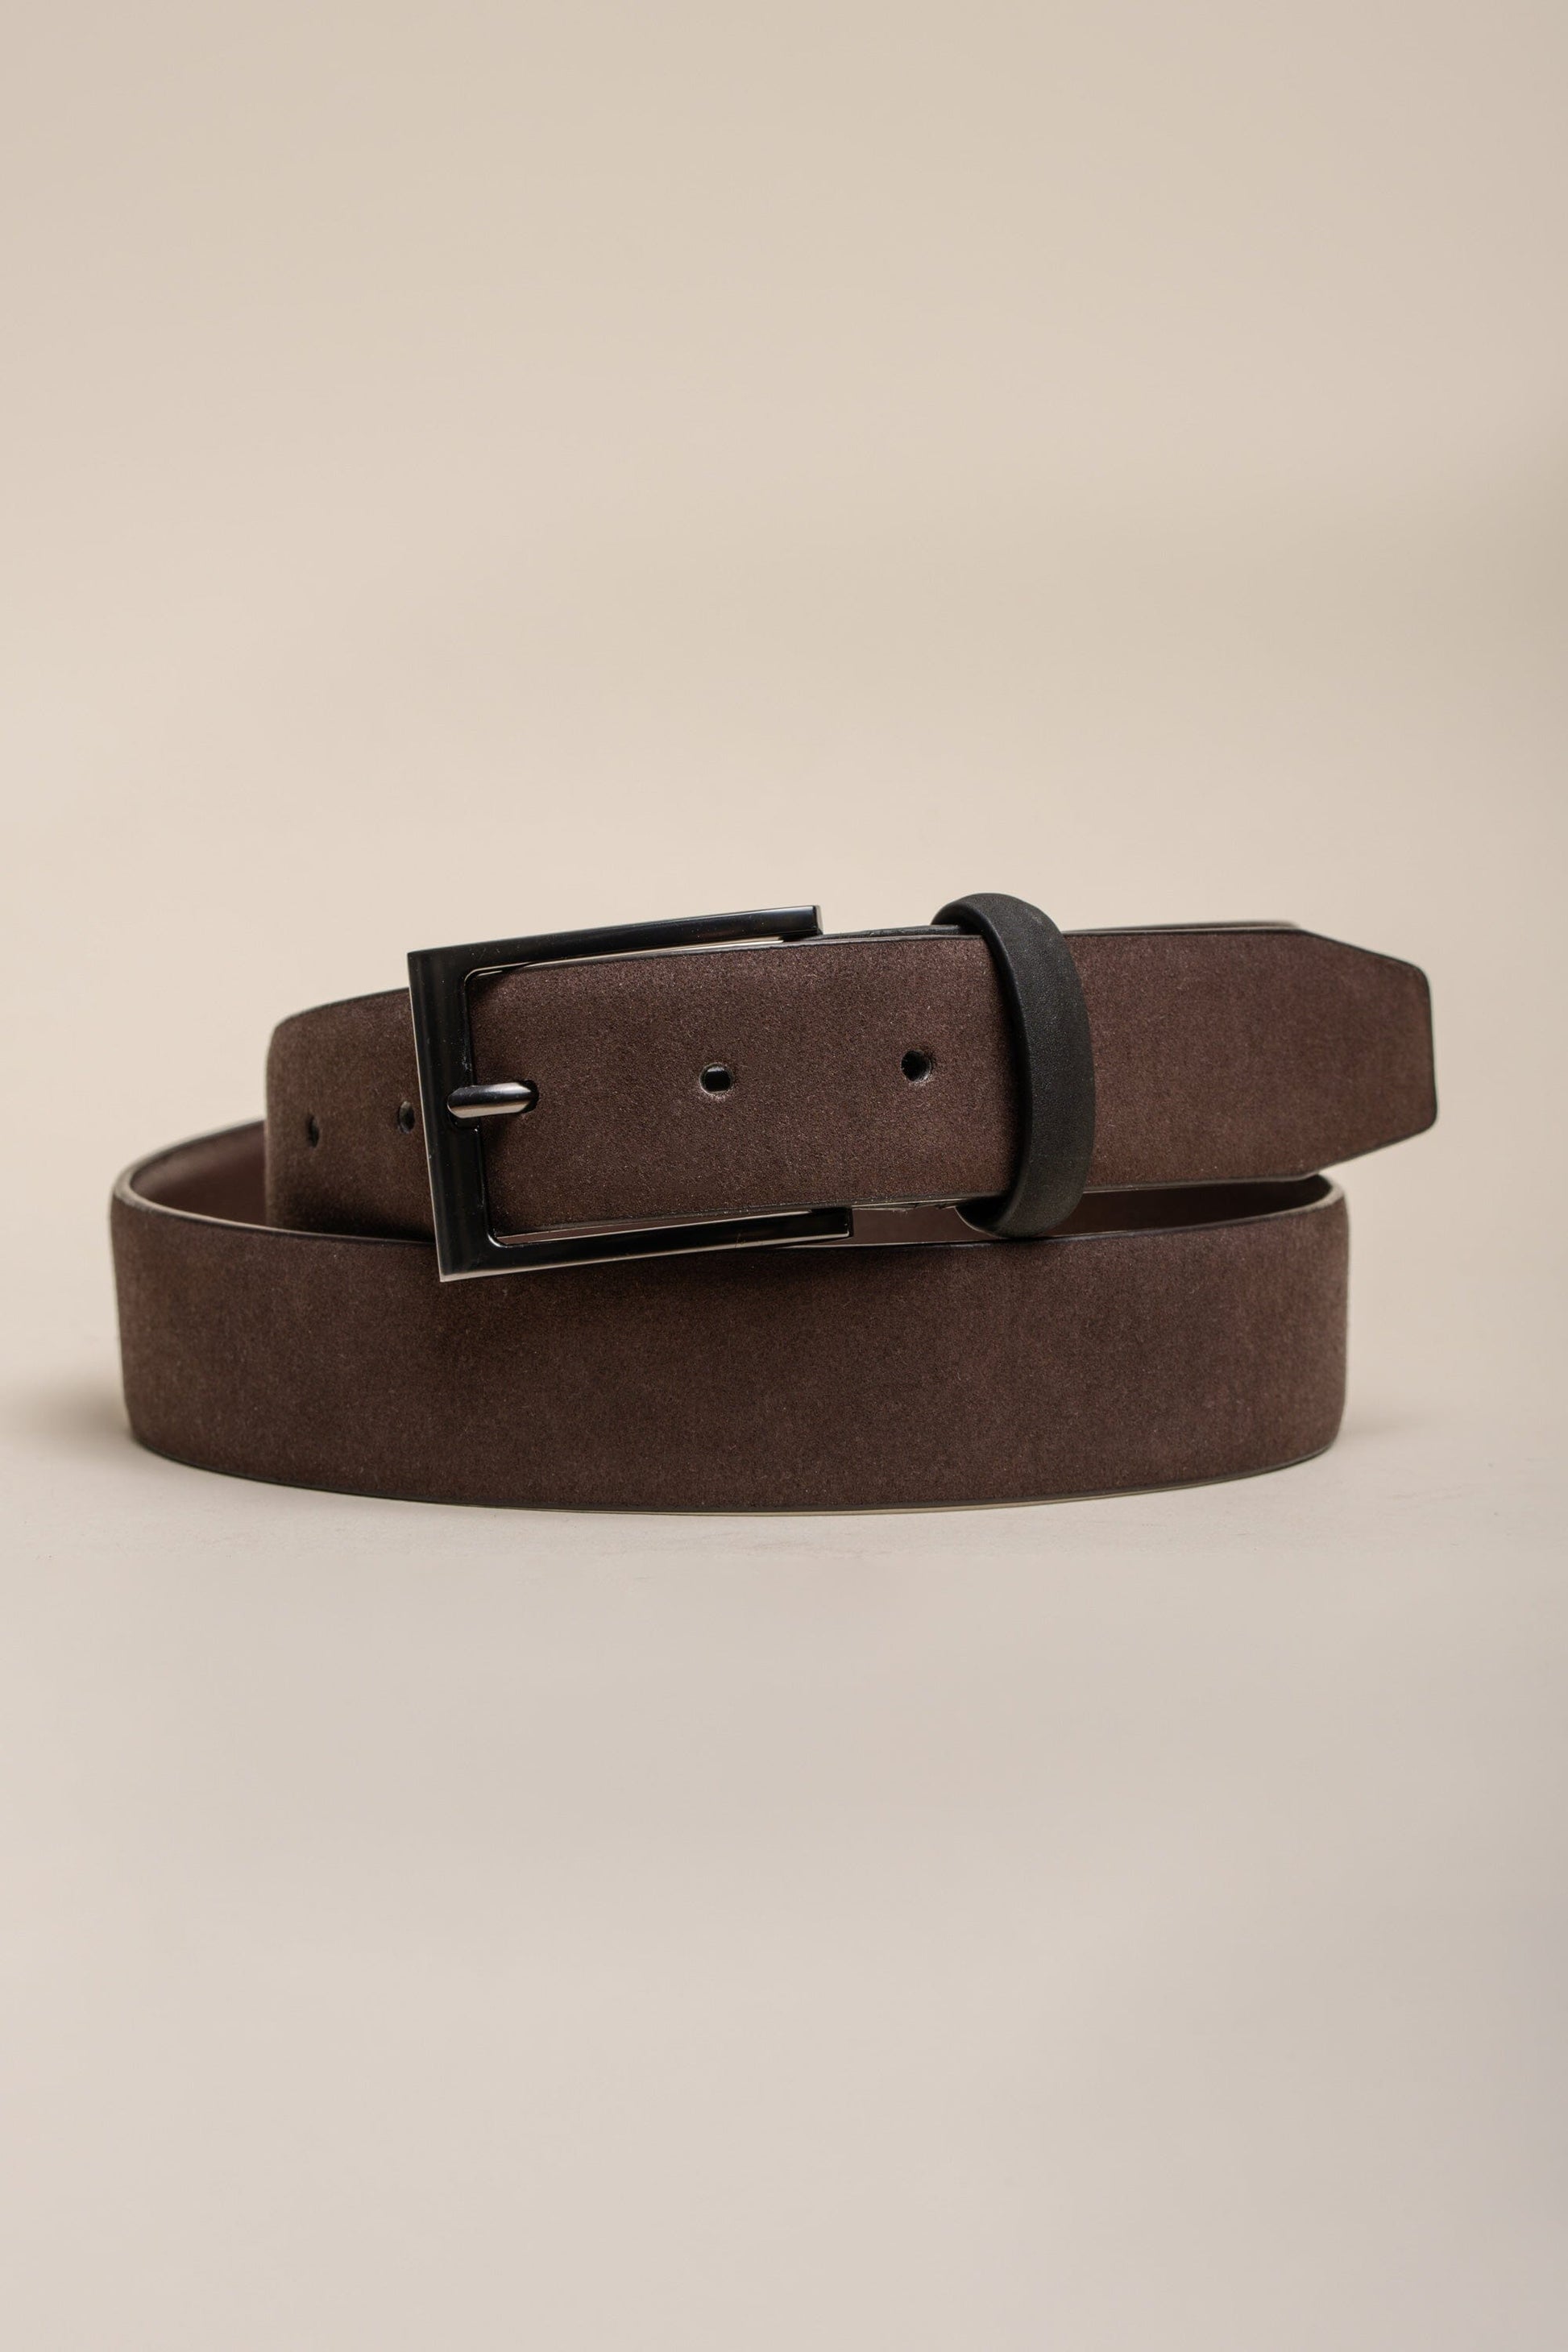 BT02 Belt - Available in 3 colours - Belts - Brown 30" - 32" - THREADPEPPER